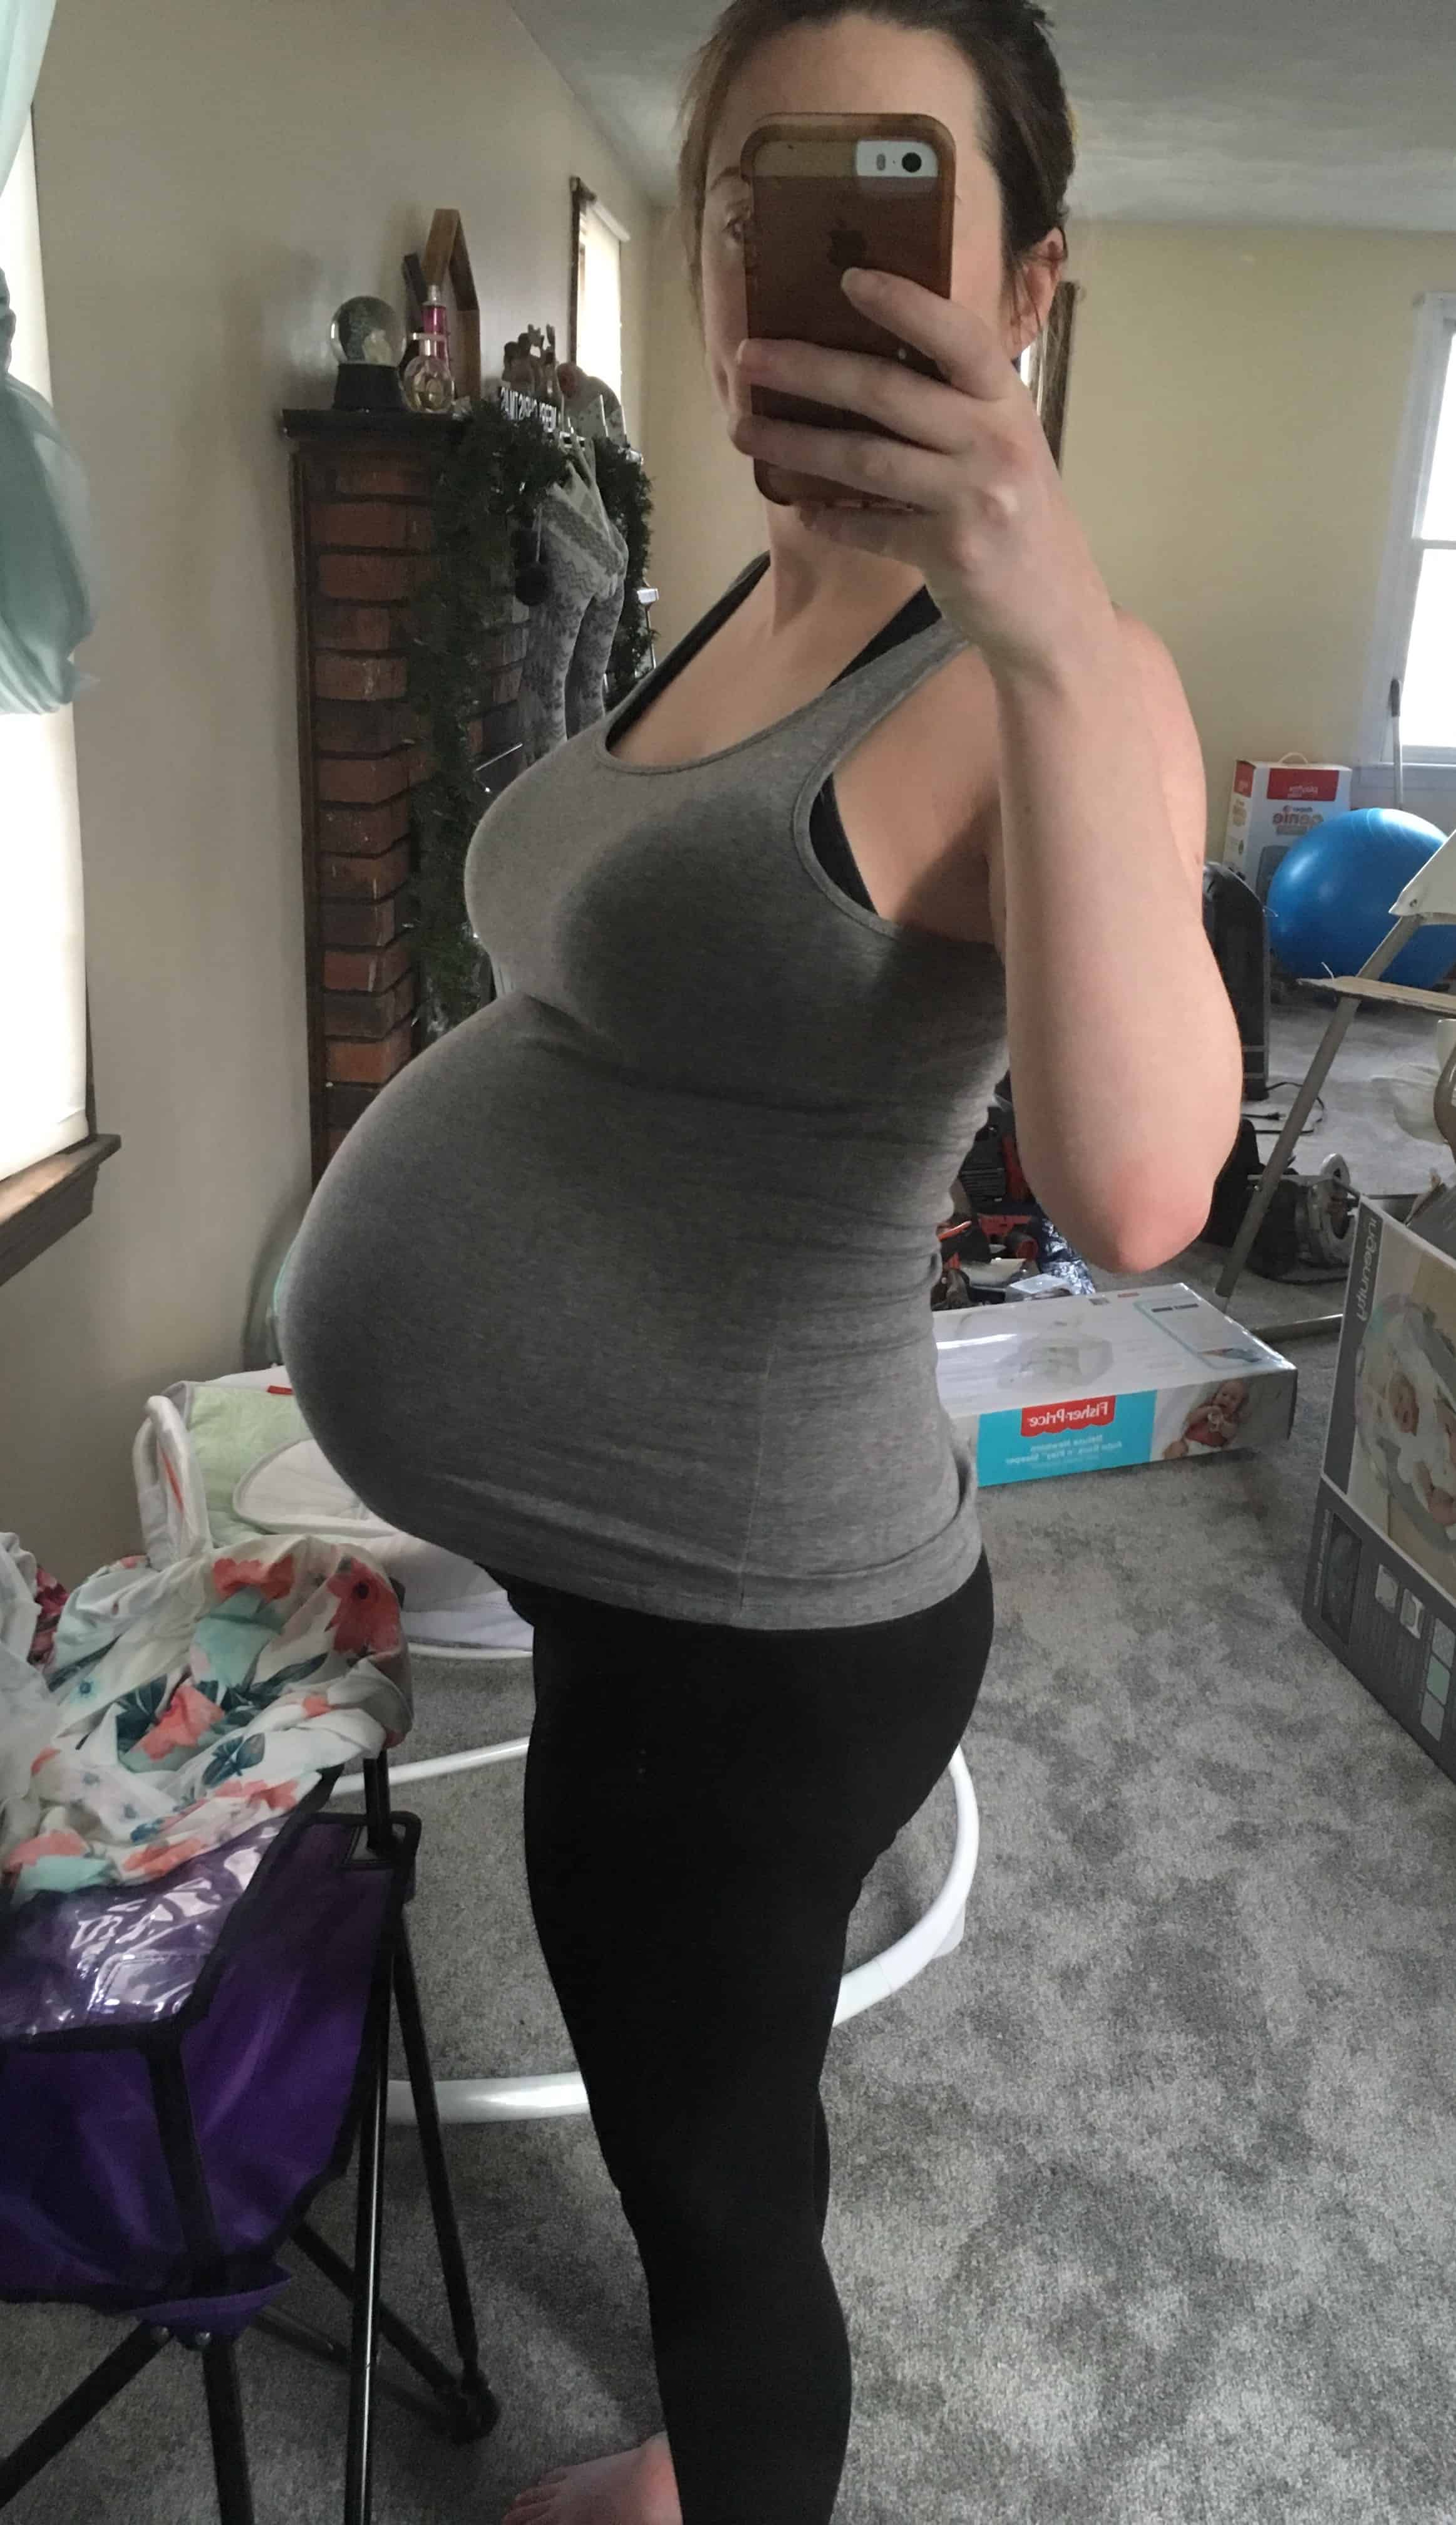 31 weeks pregnant with twins